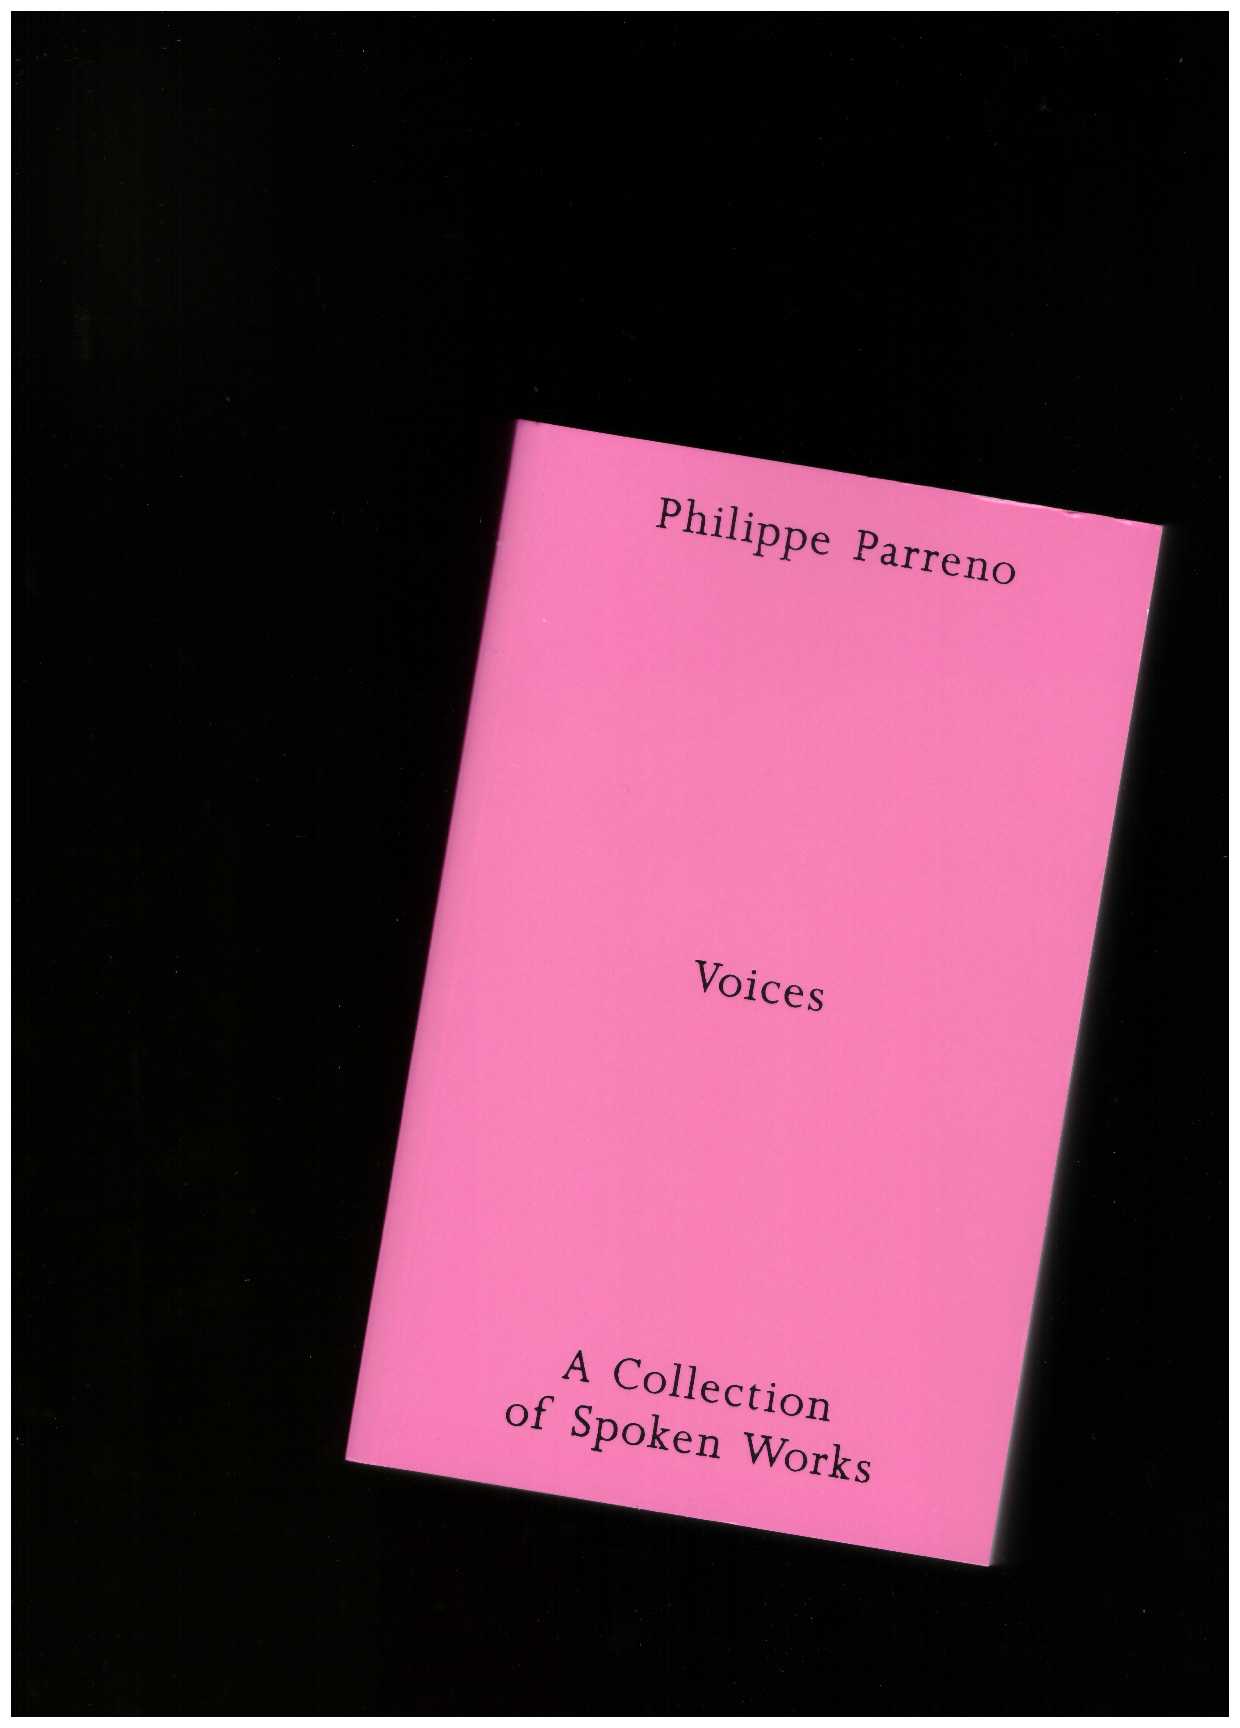 PARRENO, Philippe - Voices. A Collection of Spoken Works